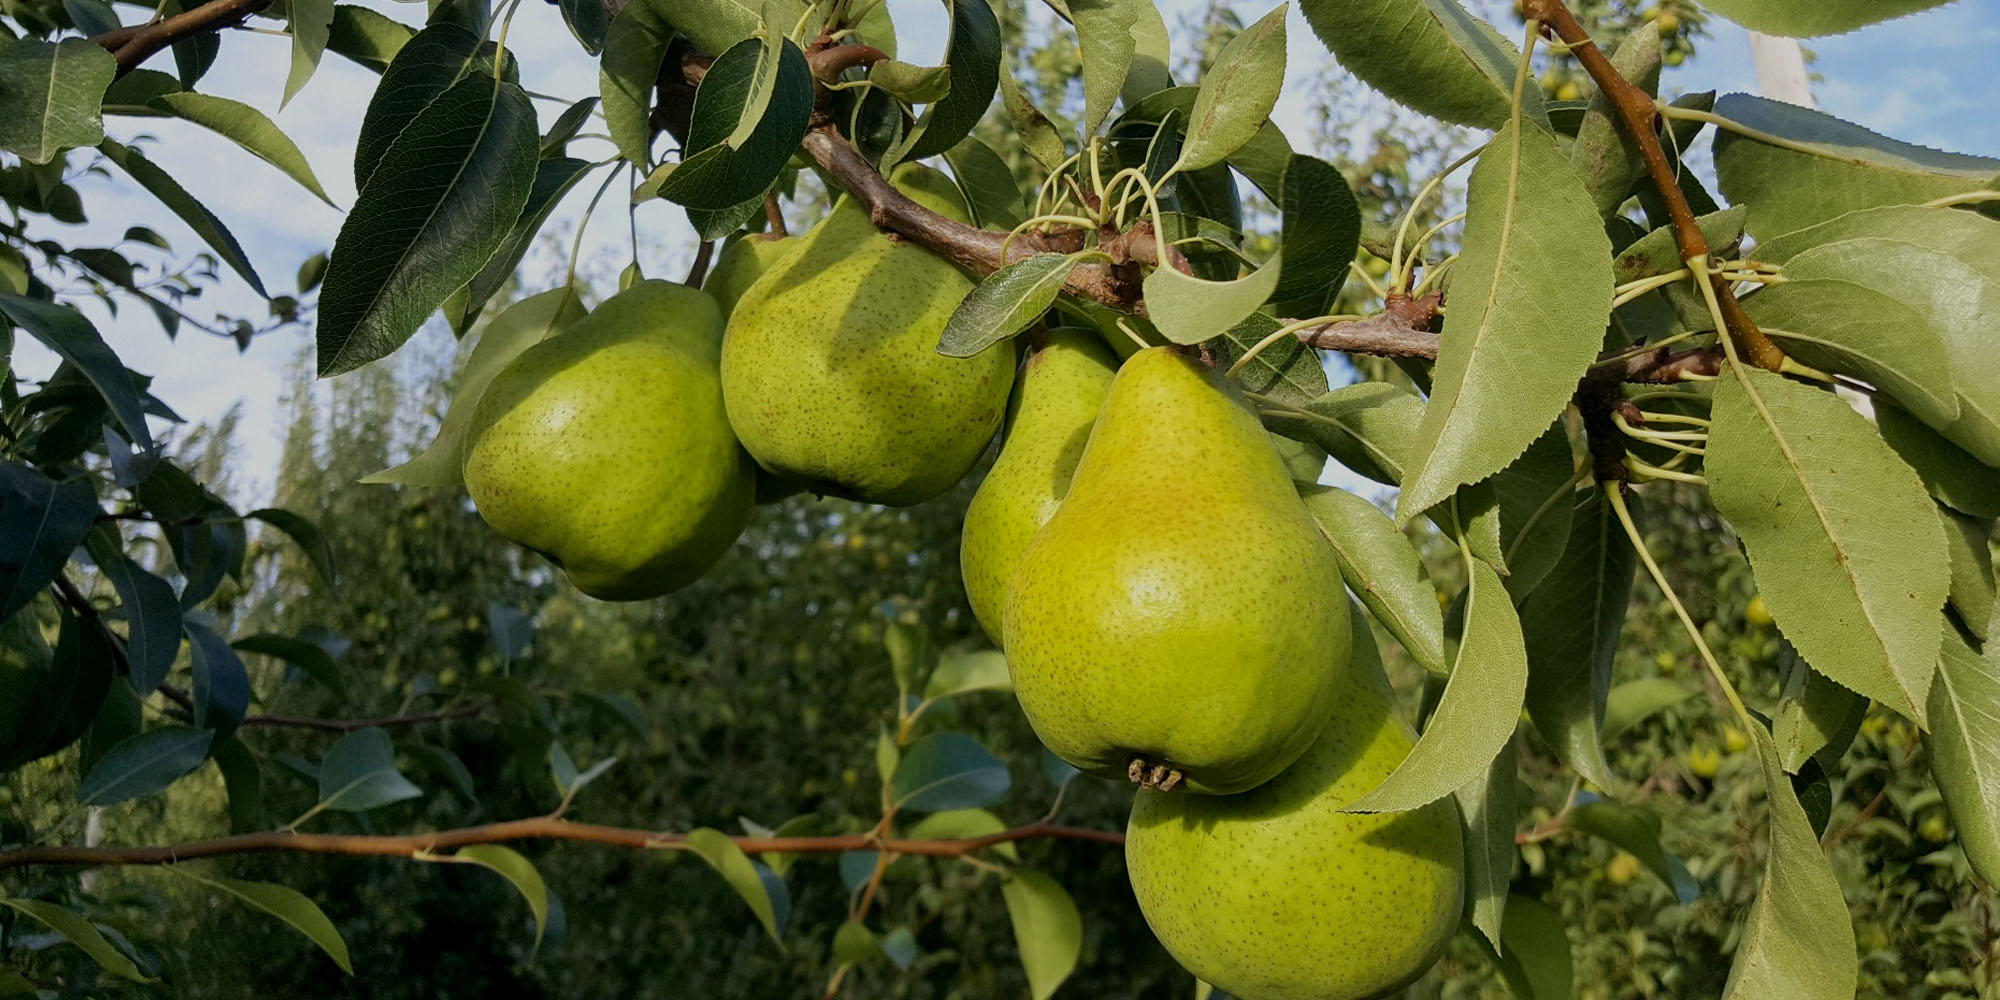 Organic pears from the world's best microclimates.